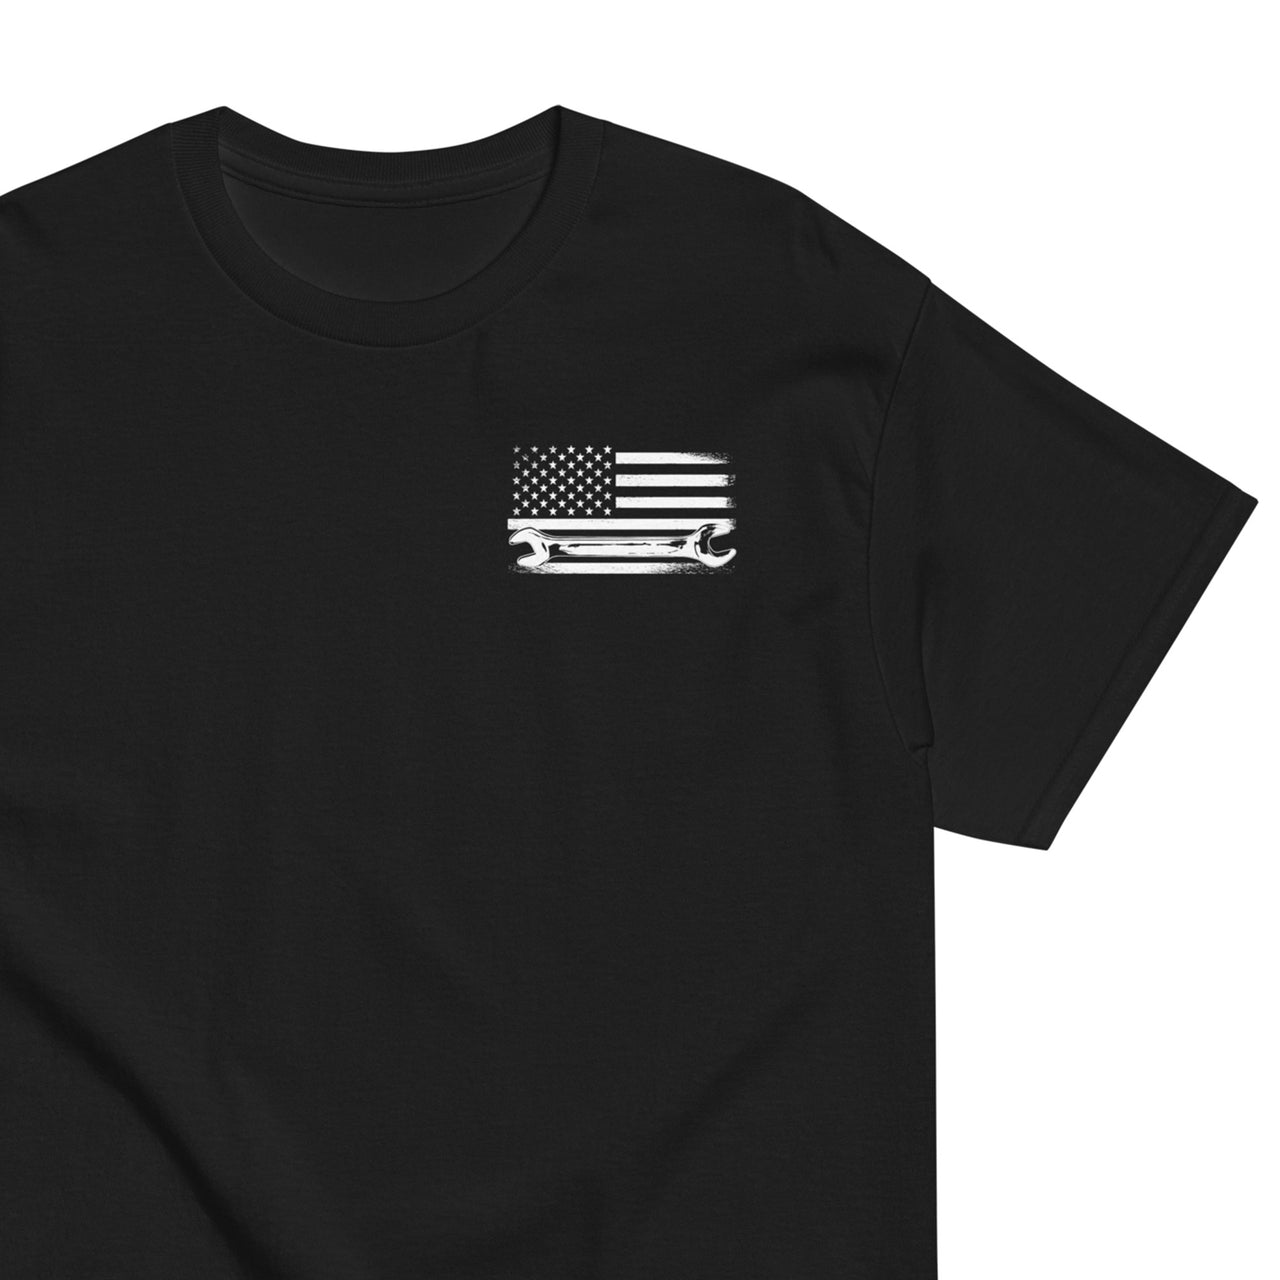 Diesel Mechanic American Flag T-Shirt in black - front print view close up